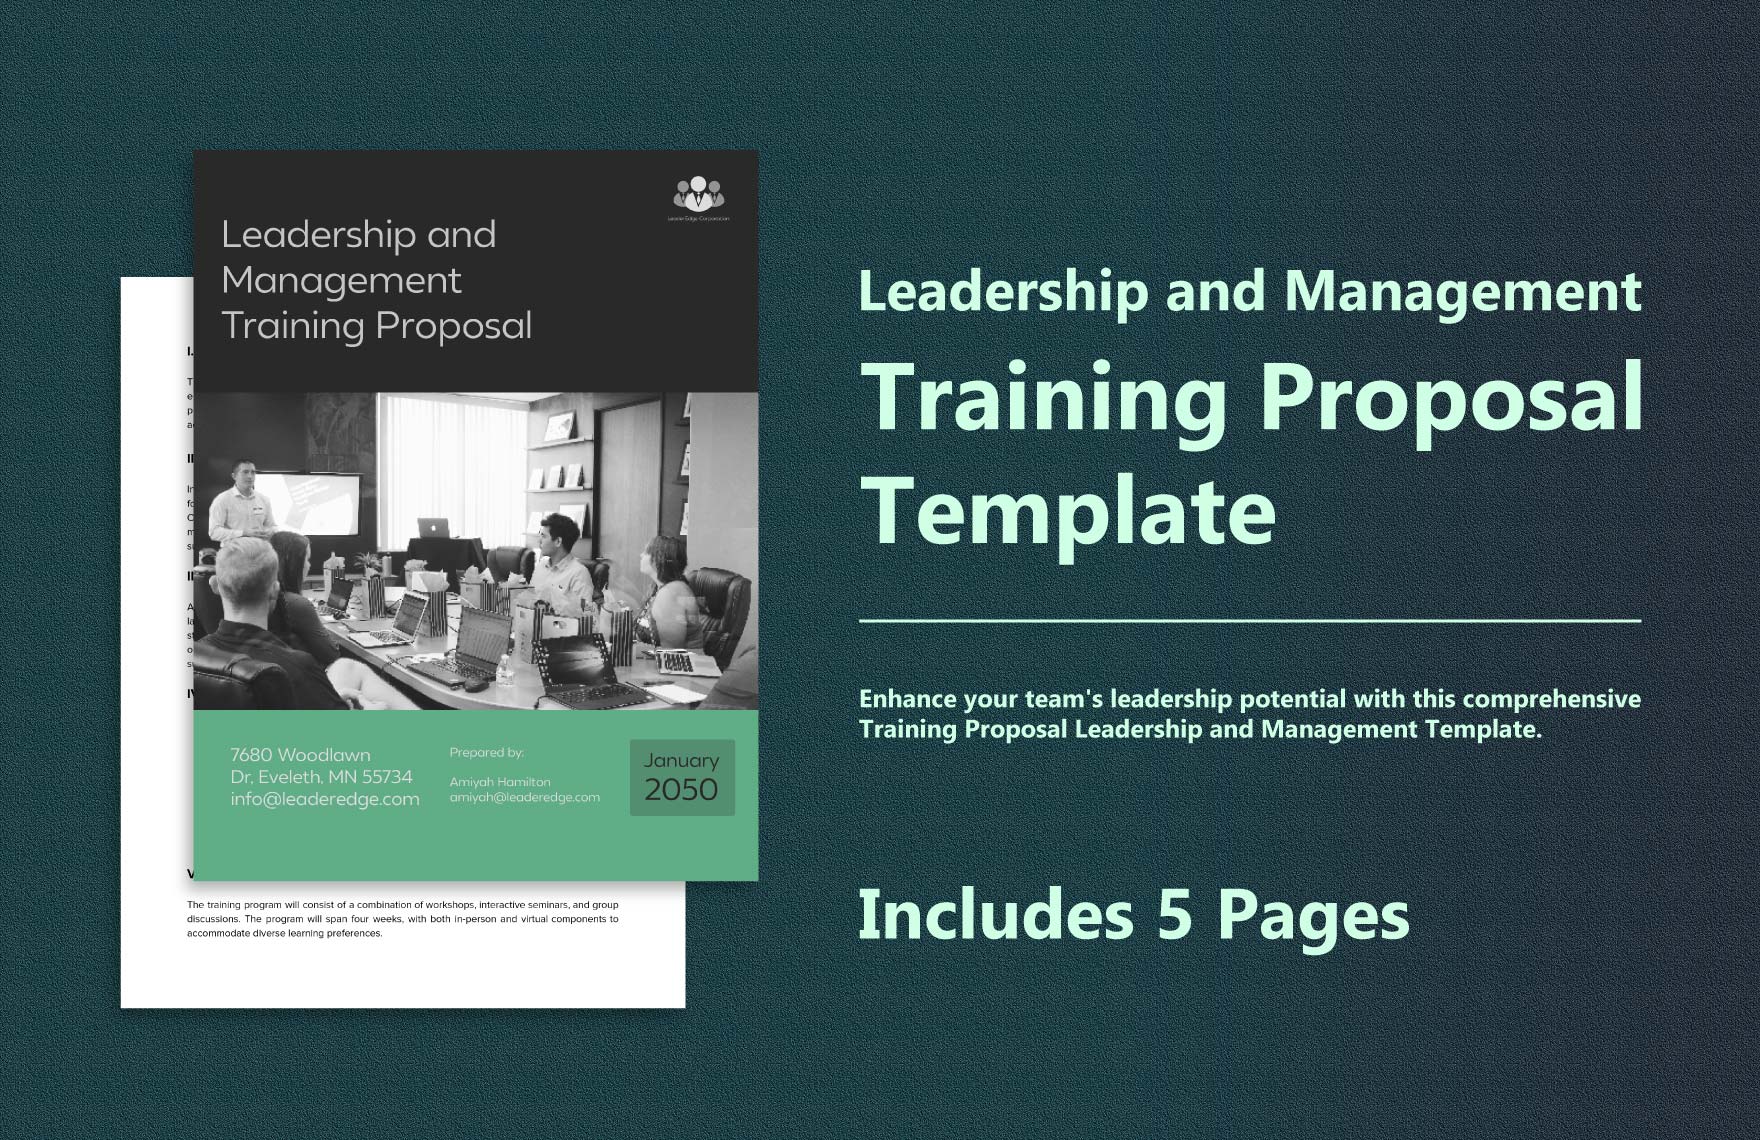 Leadership and Management Training Proposal Template